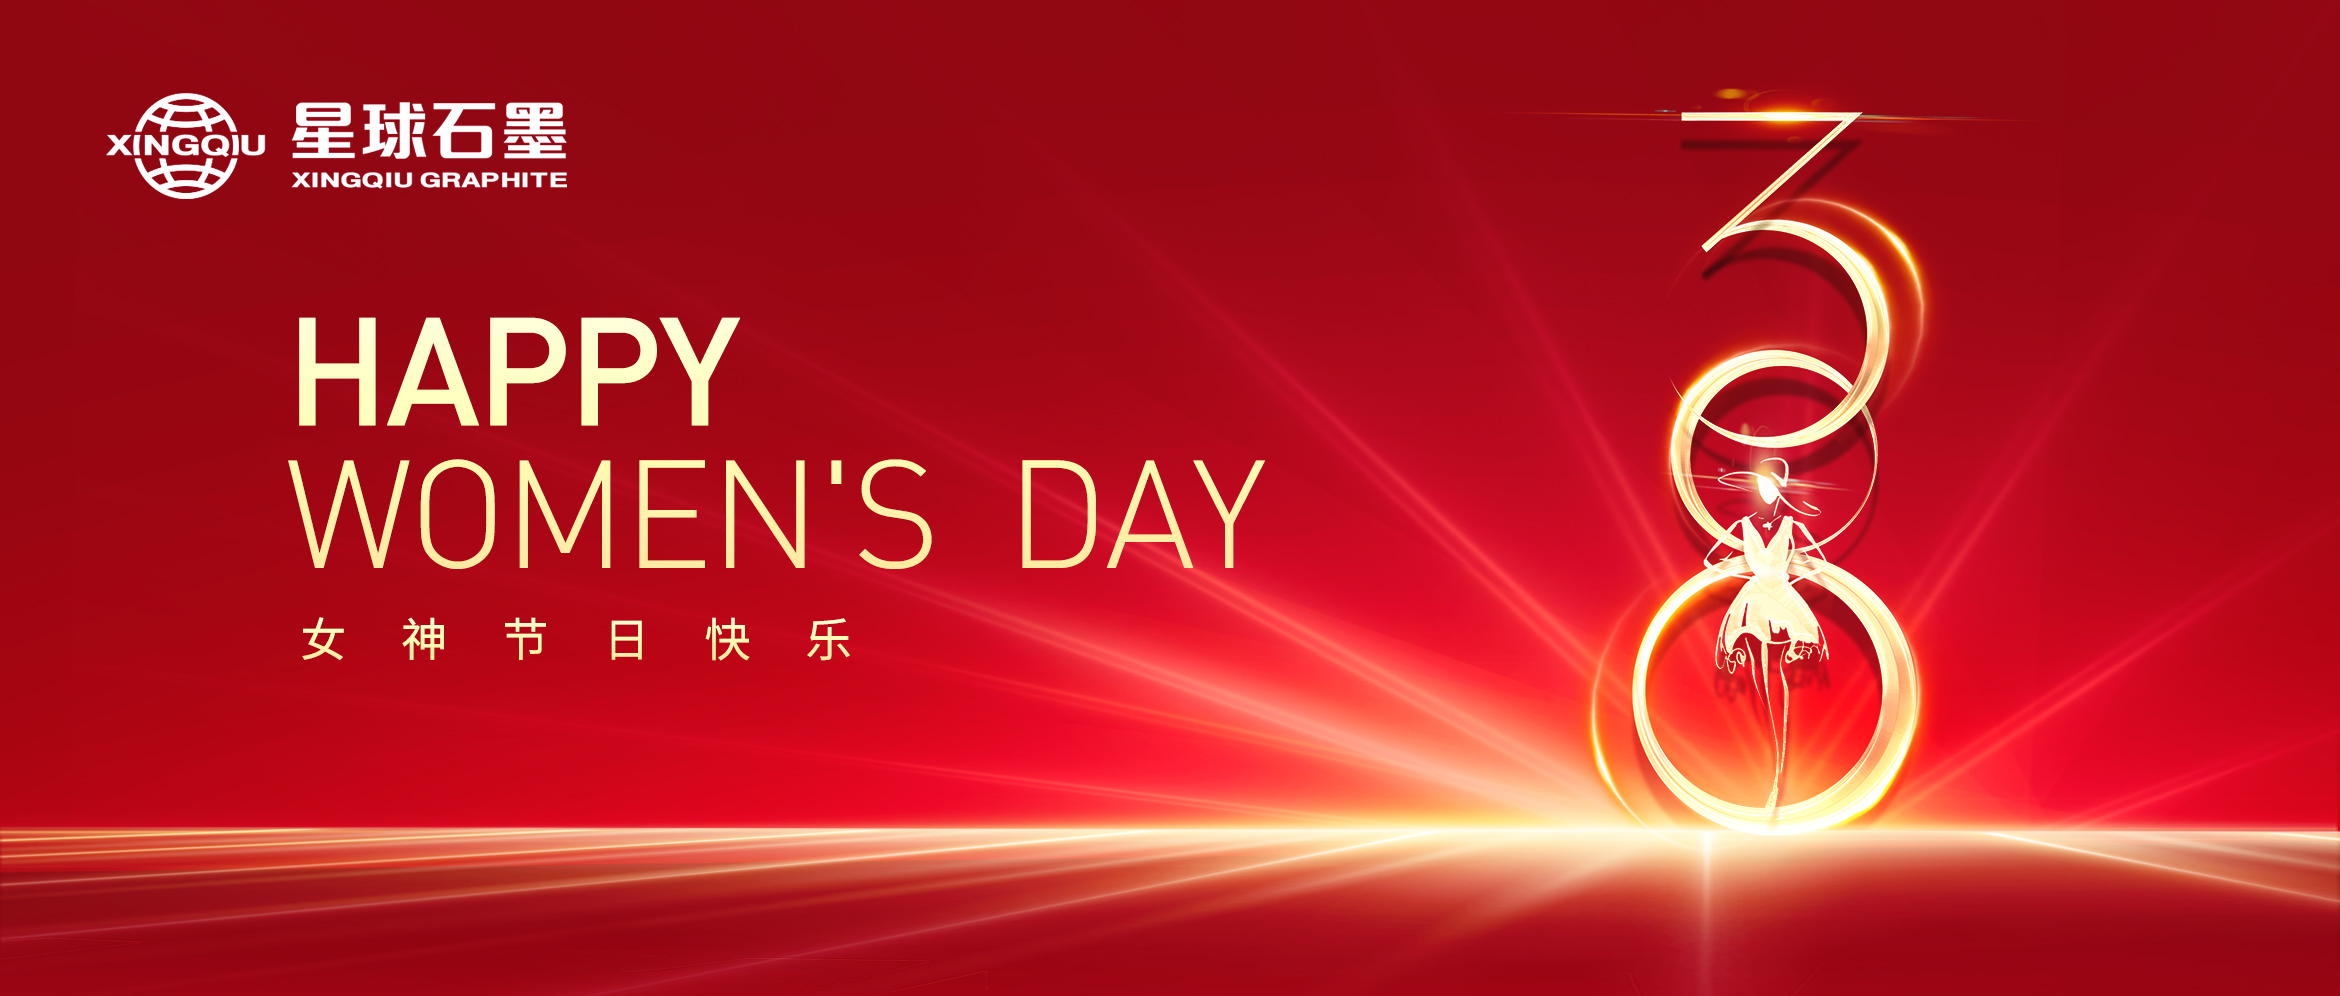 Charming Women and Happy Women's Day